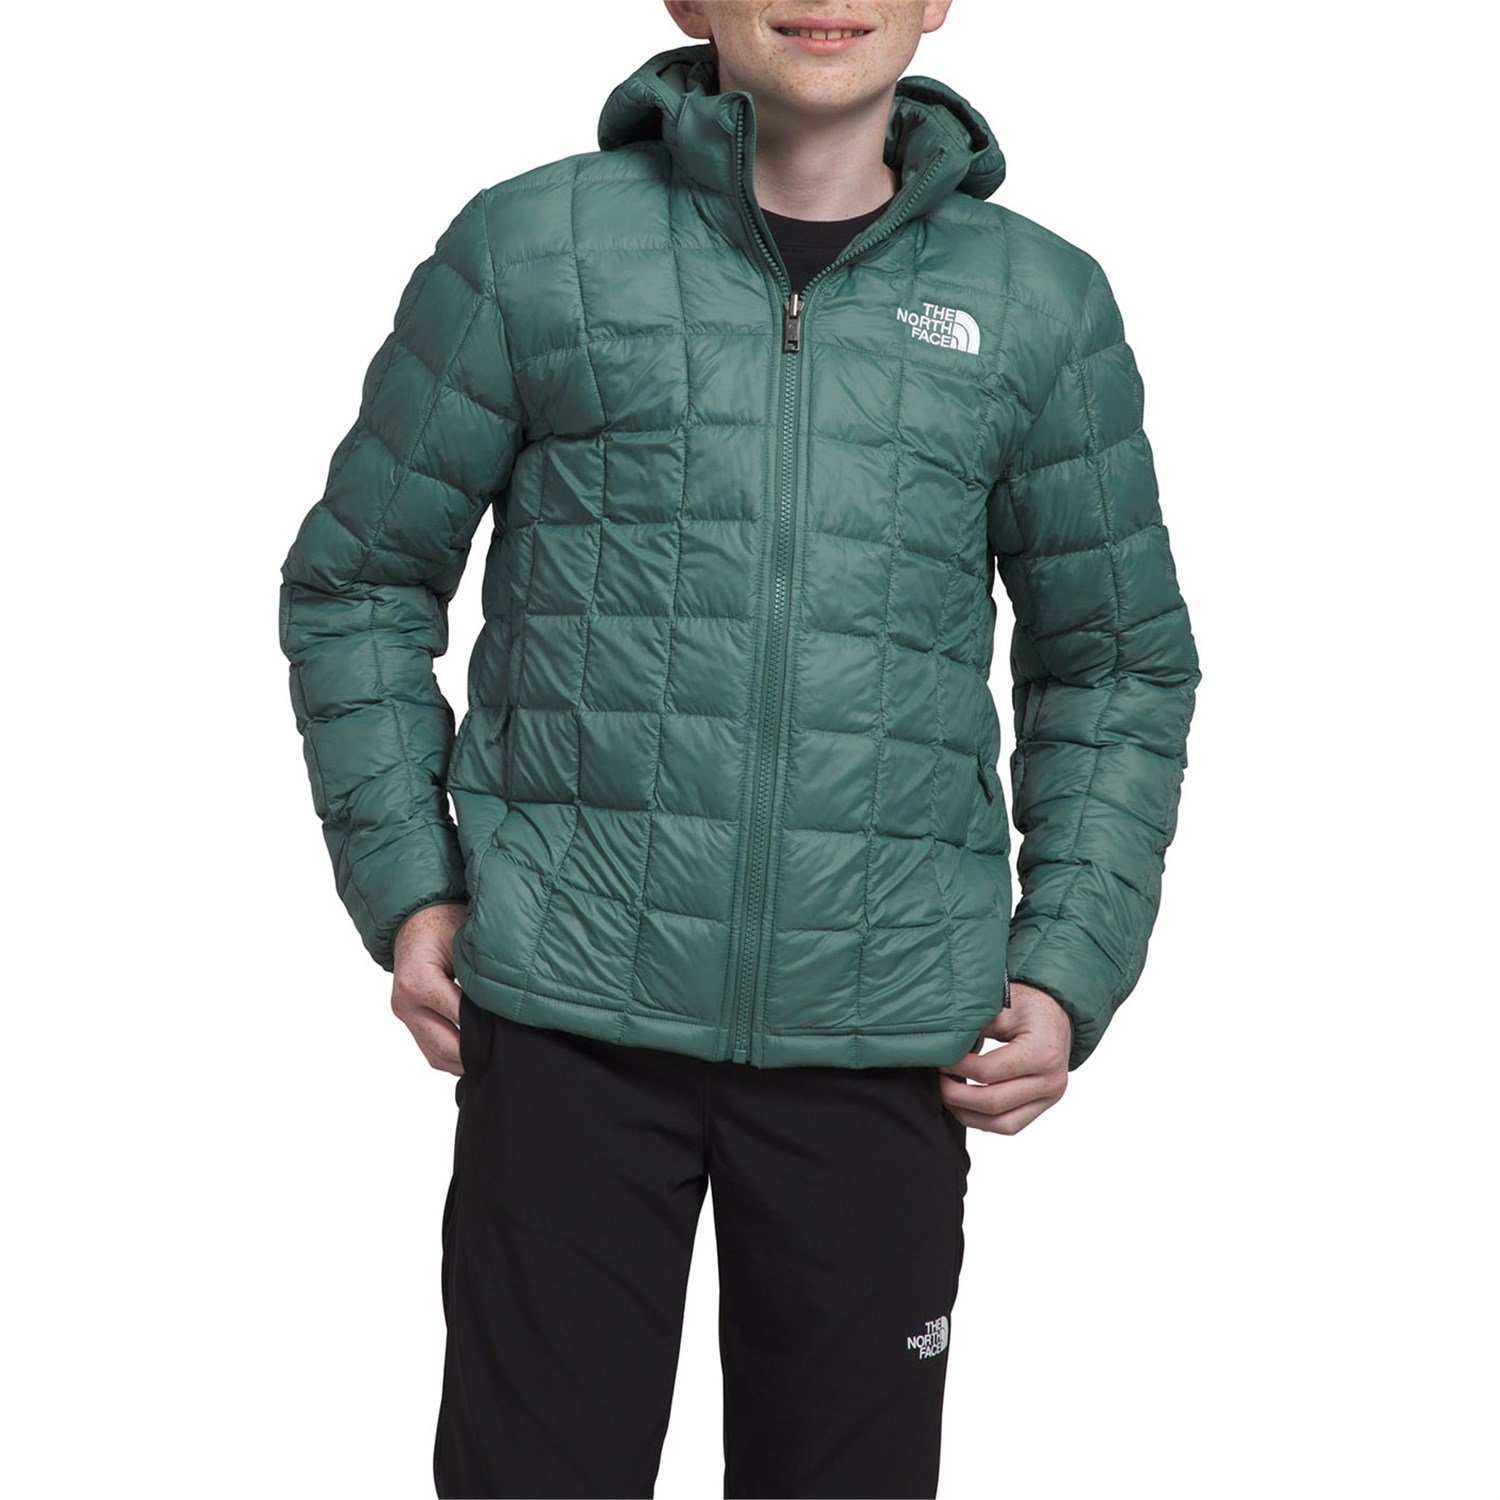 Куртка The North Face ThermoBall Hooded, цвет Dark Sage куртка the north face thermoball eco 2 0 plus цвет dark sage